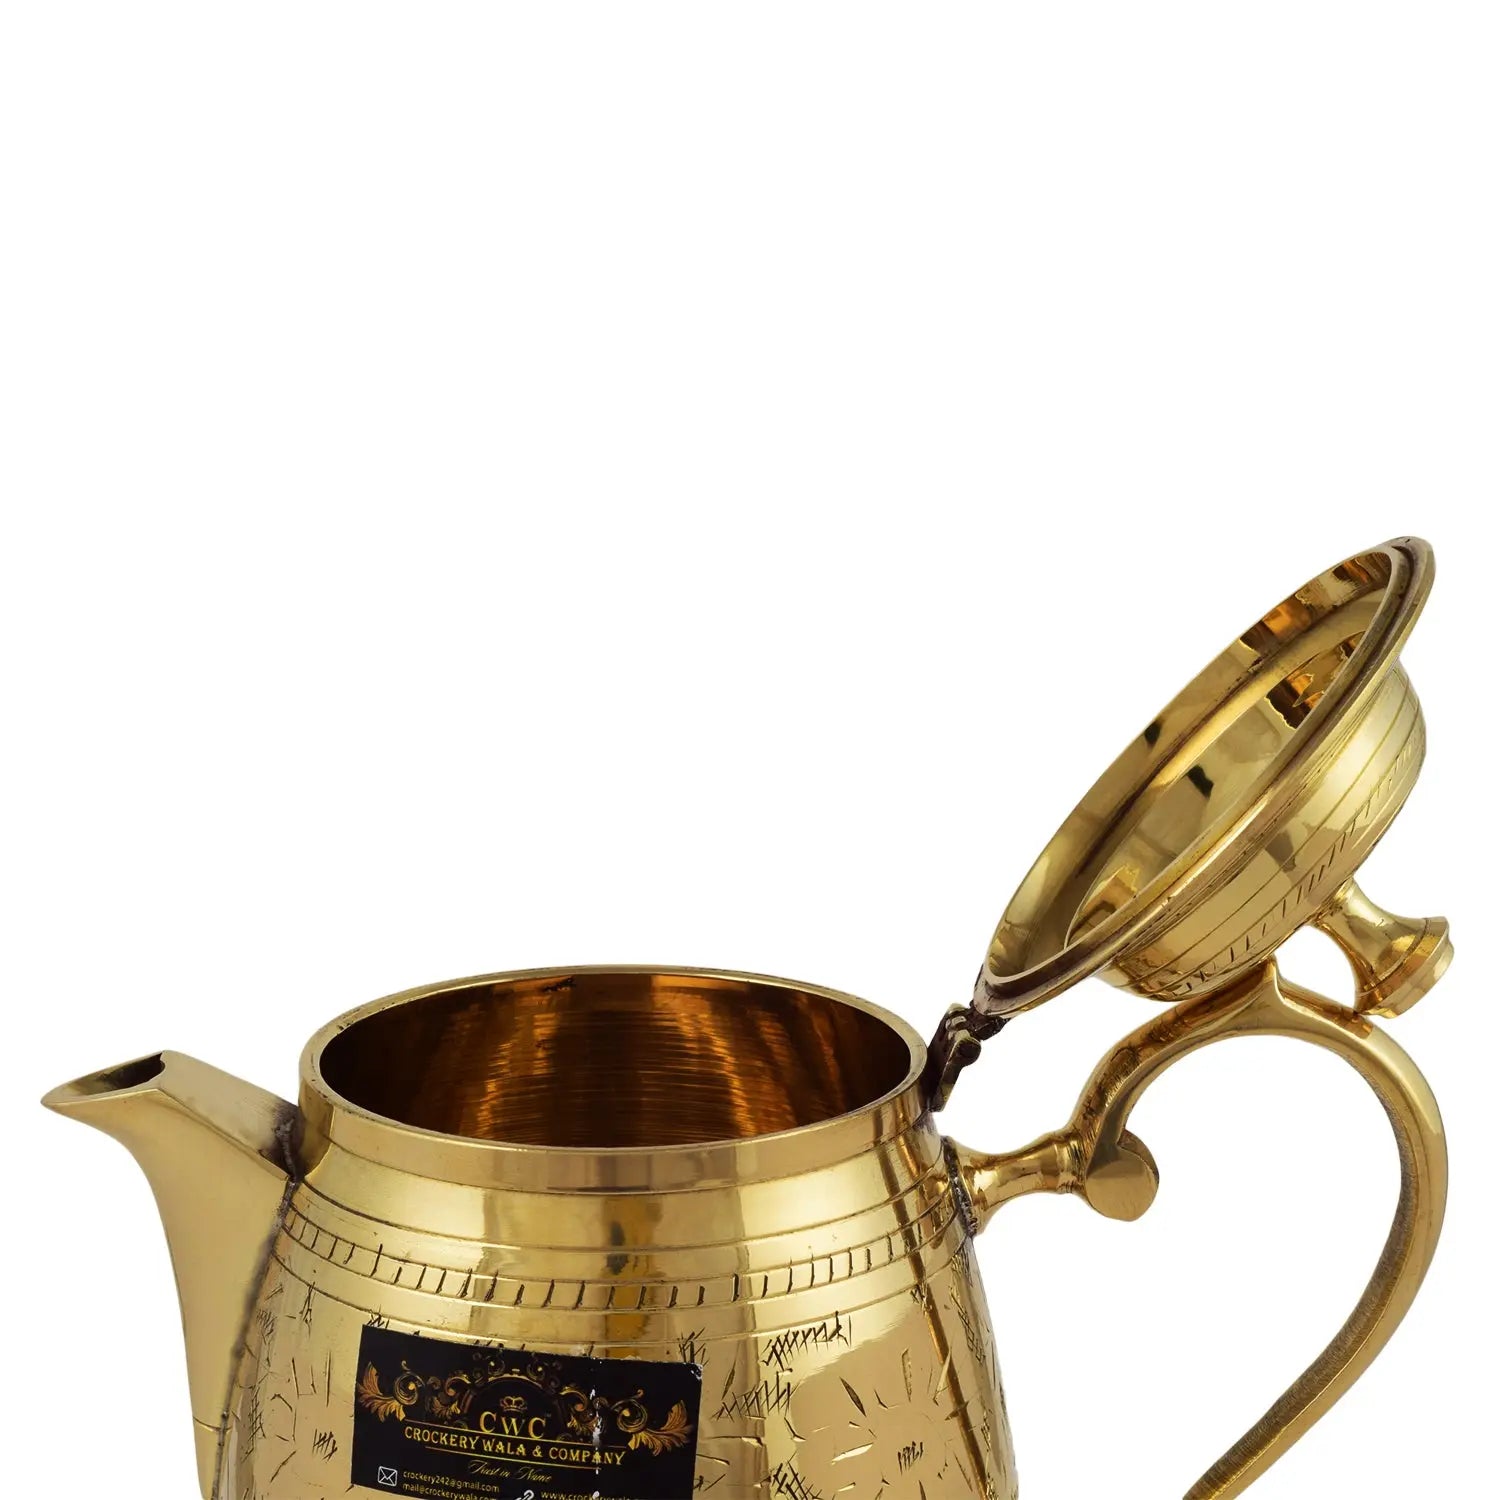 Pure Brass Barrel Design Jug Pitcher Jar with Lid for Storage & Serving Water Drinkware - CROCKERY WALA AND COMPANY 